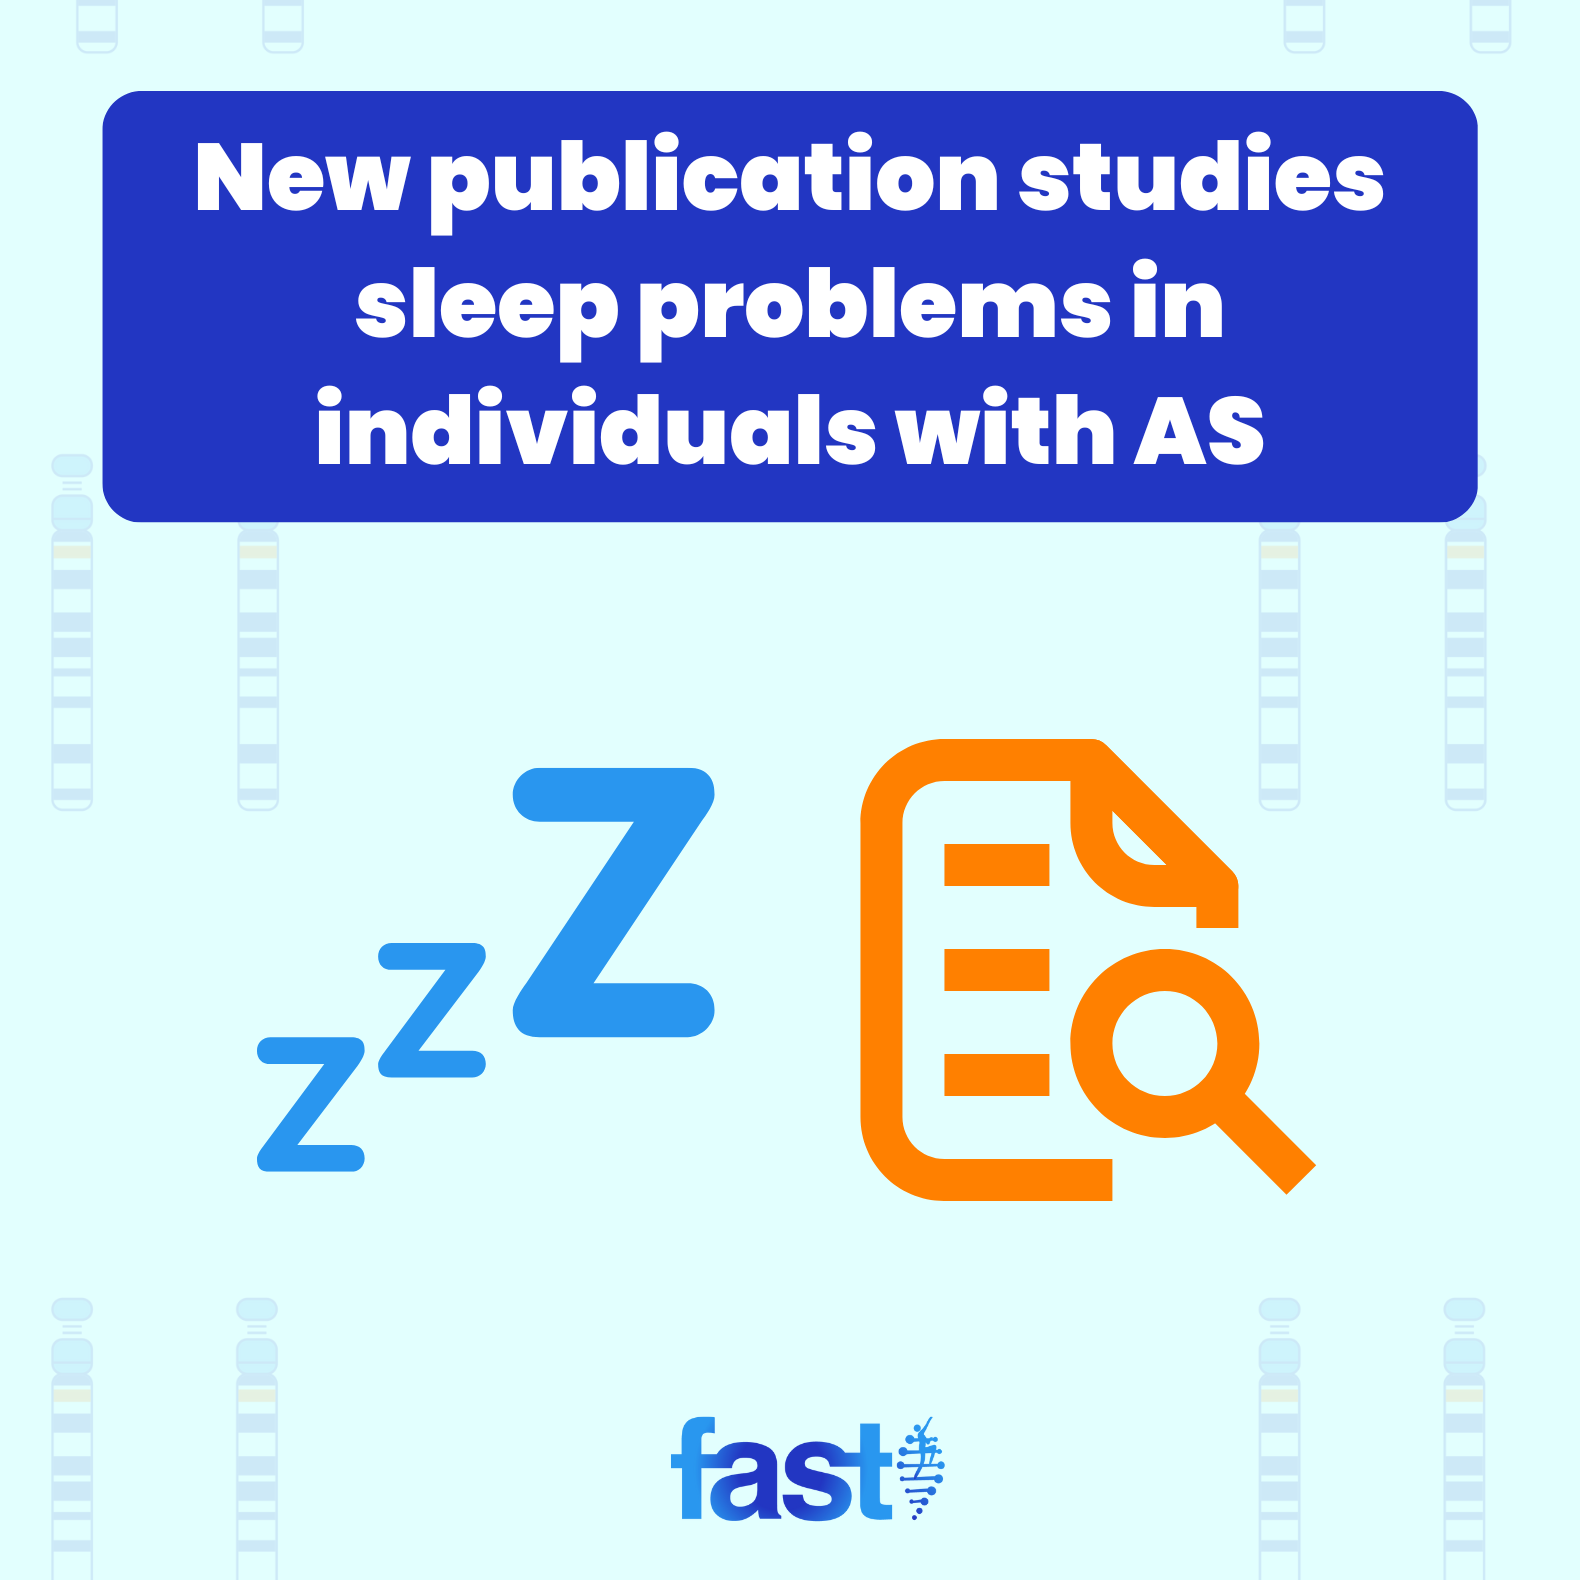 New publication studies sleep problems in individuals with AS, with graphics of snoring Z’s and a research paper